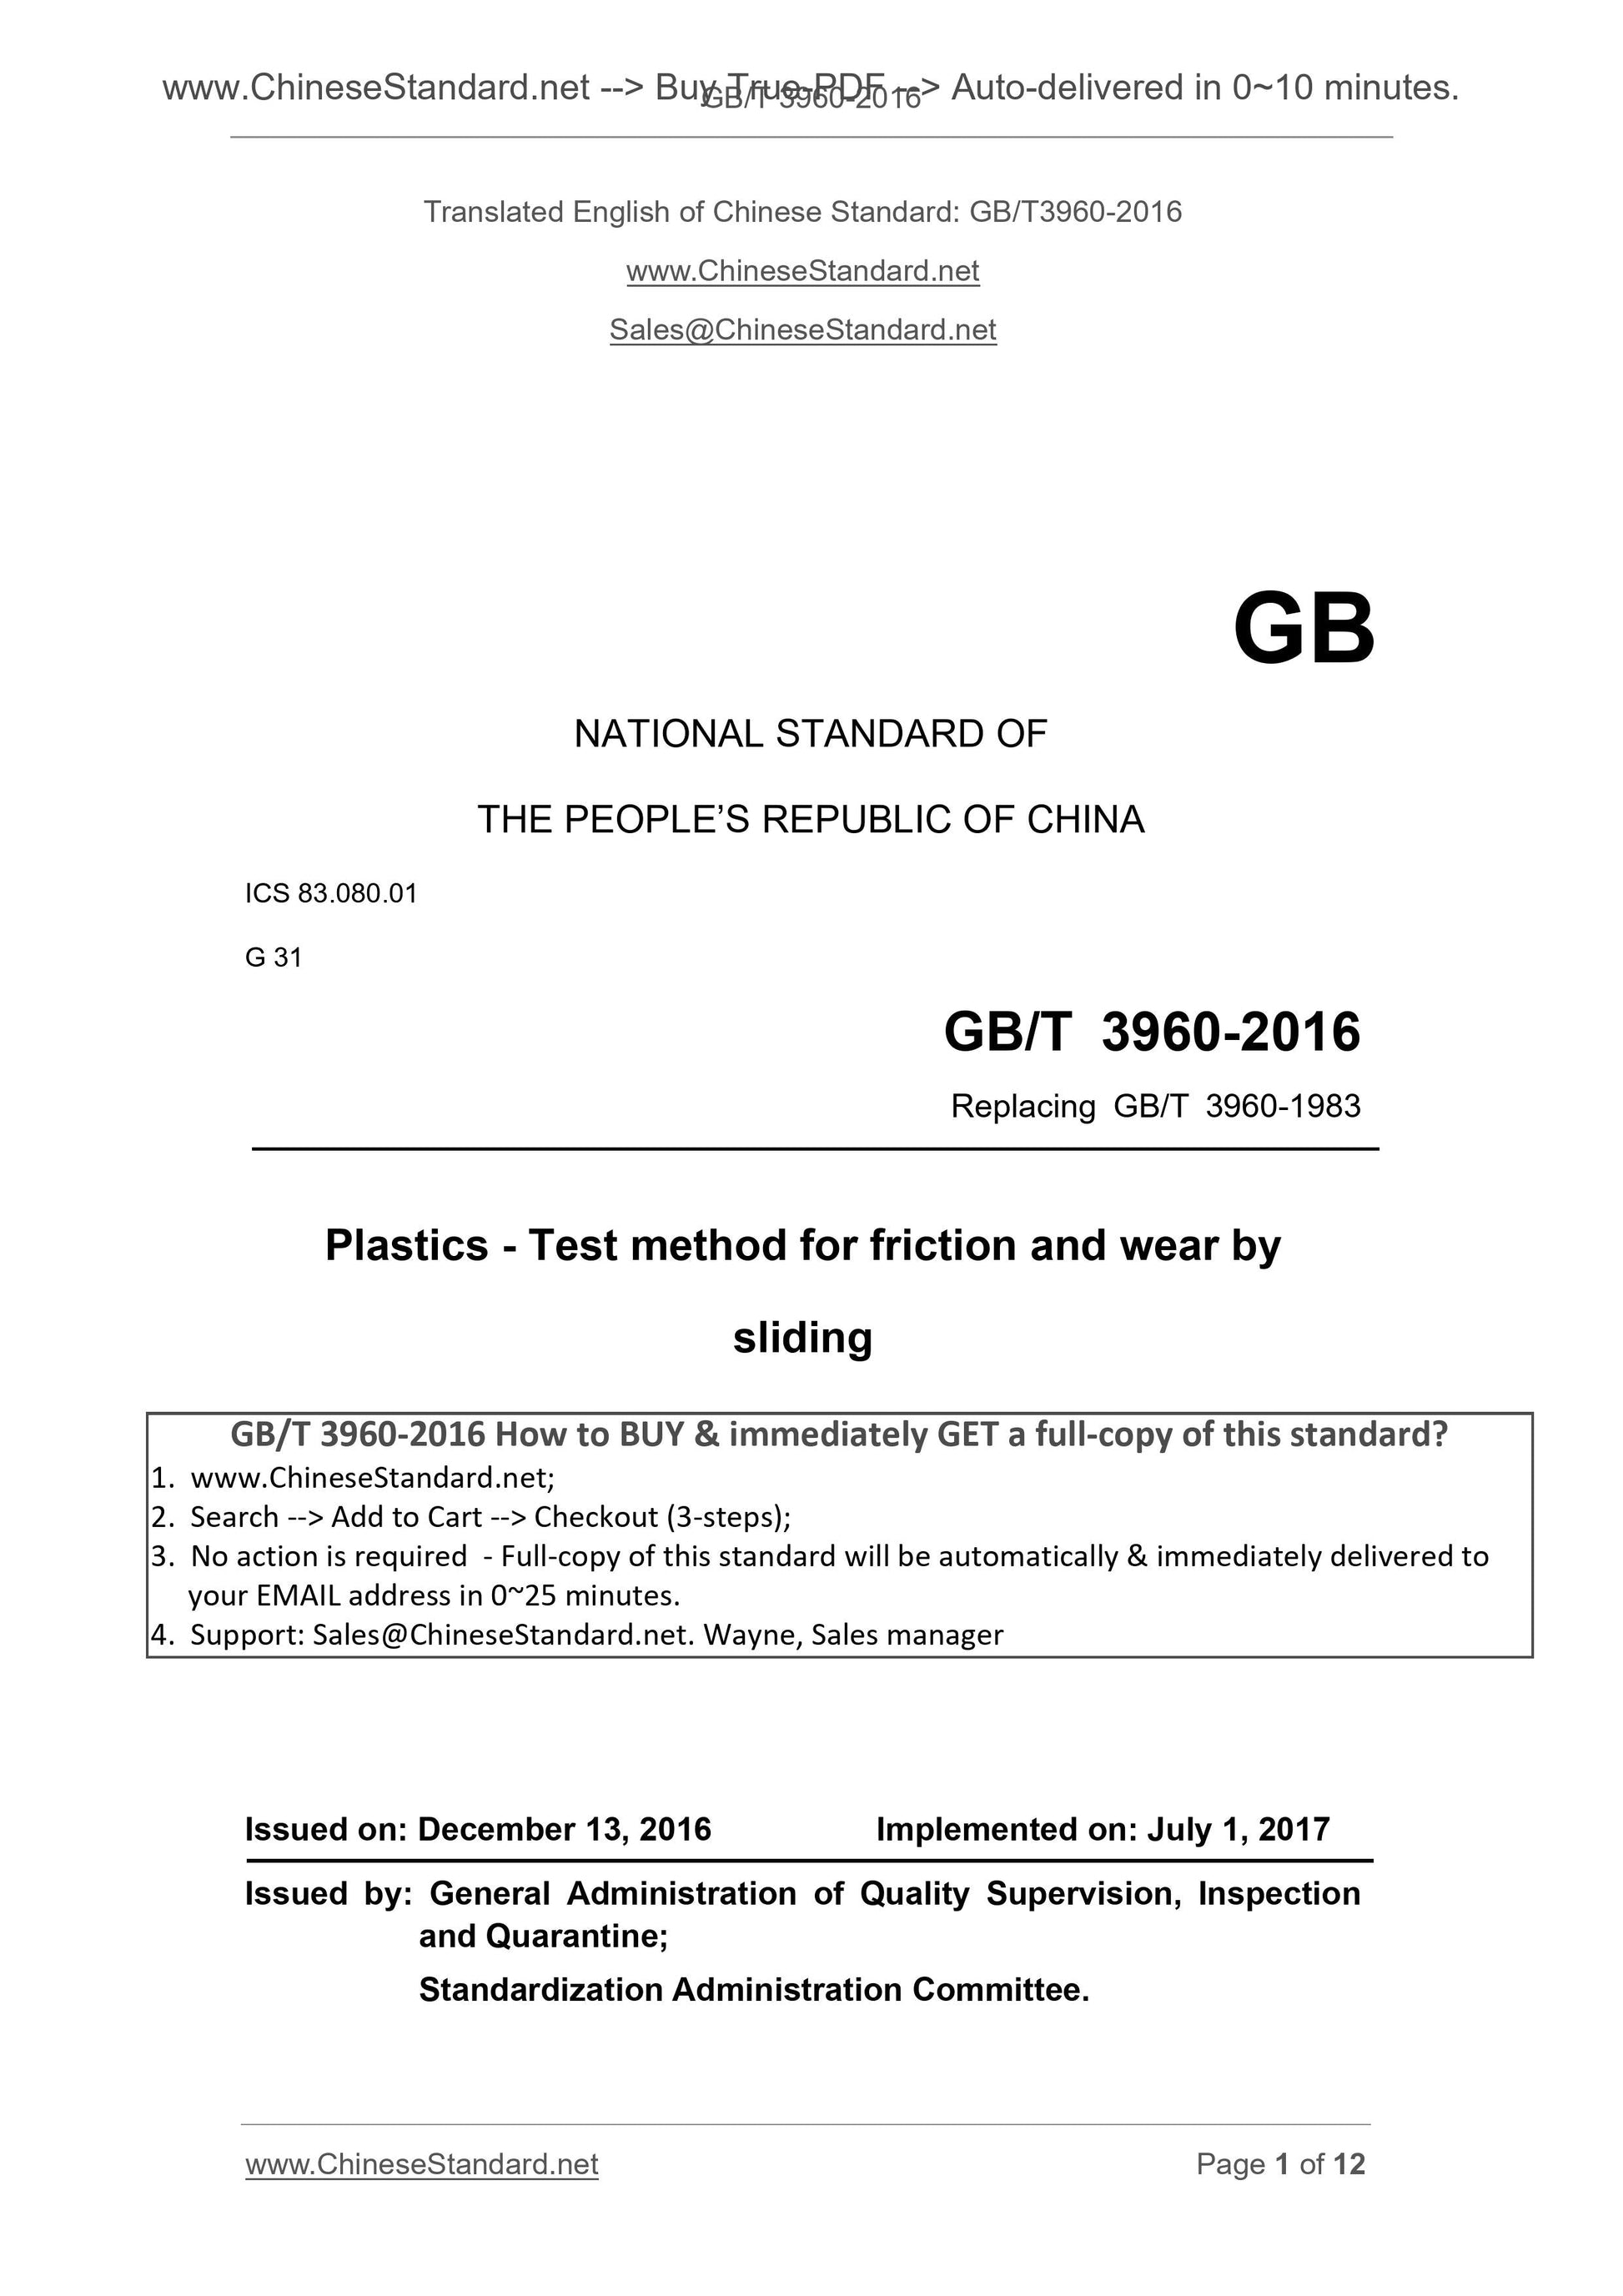 GB/T 3960-2016 Page 1